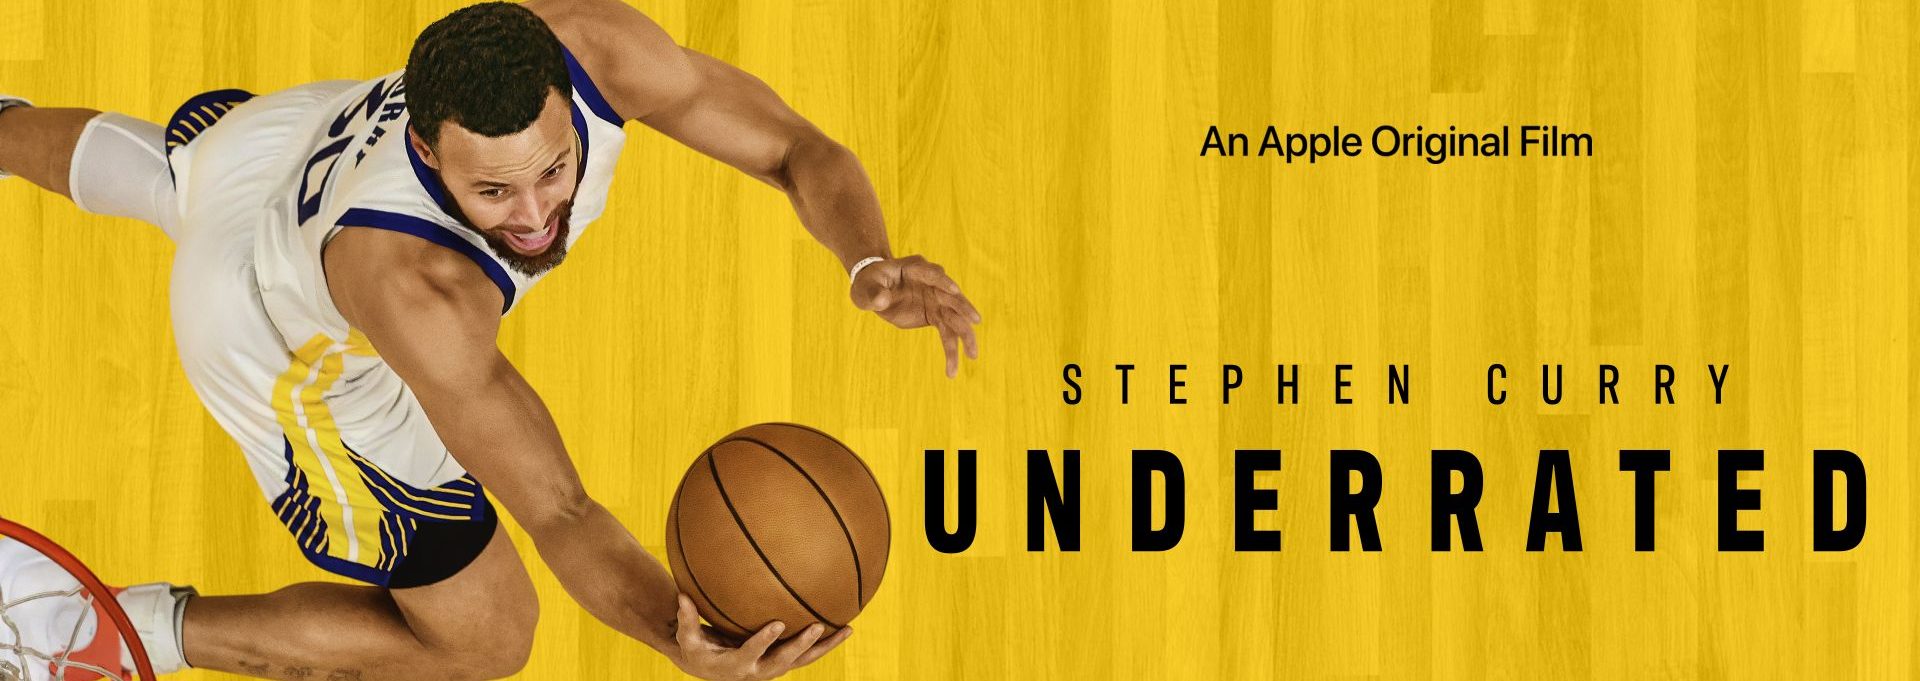 Stephen Curry: Underrated - Trailer